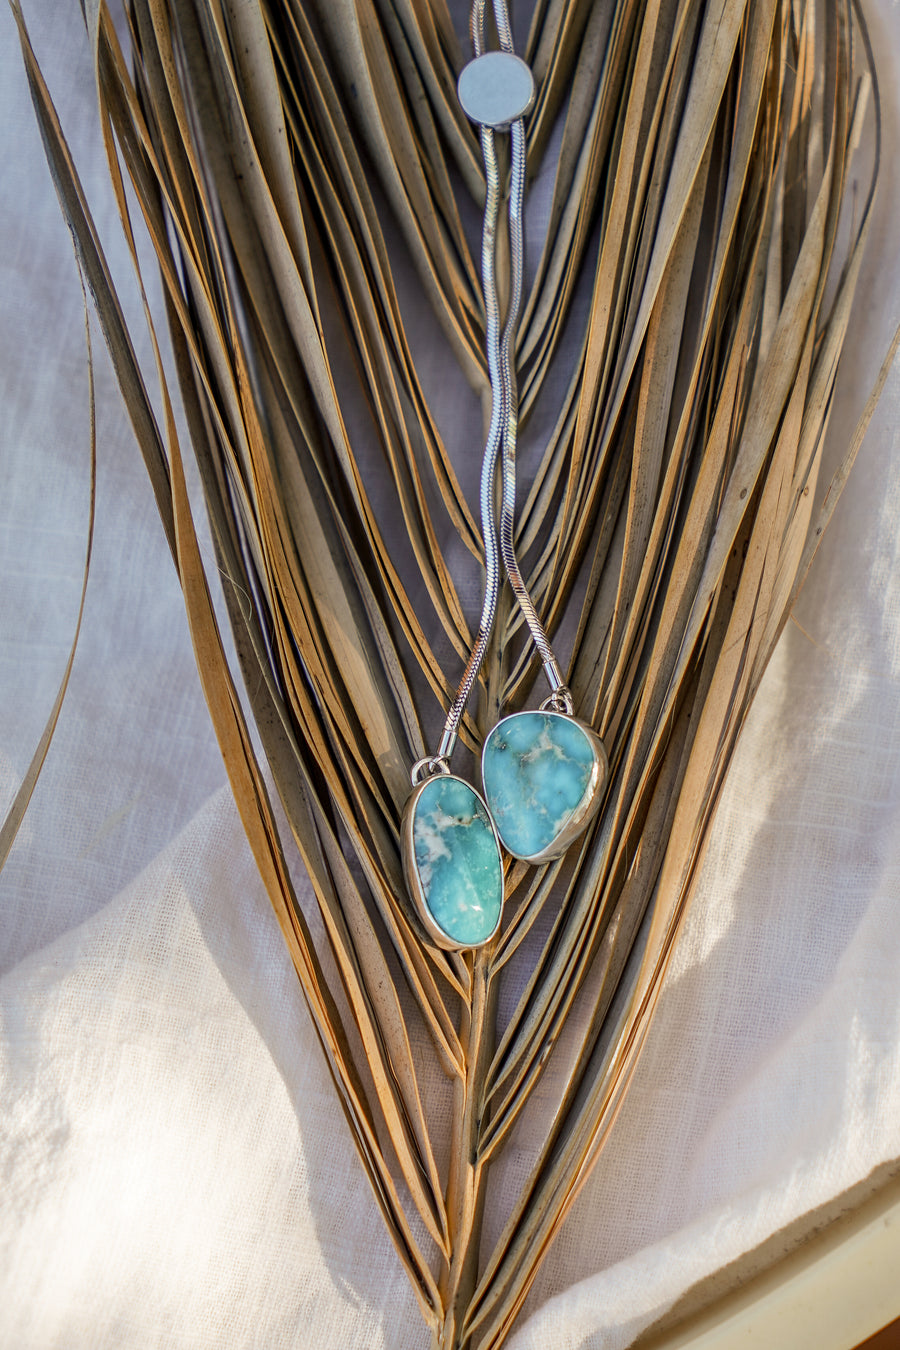 Wilding Bolo in Whitewater Turquoise